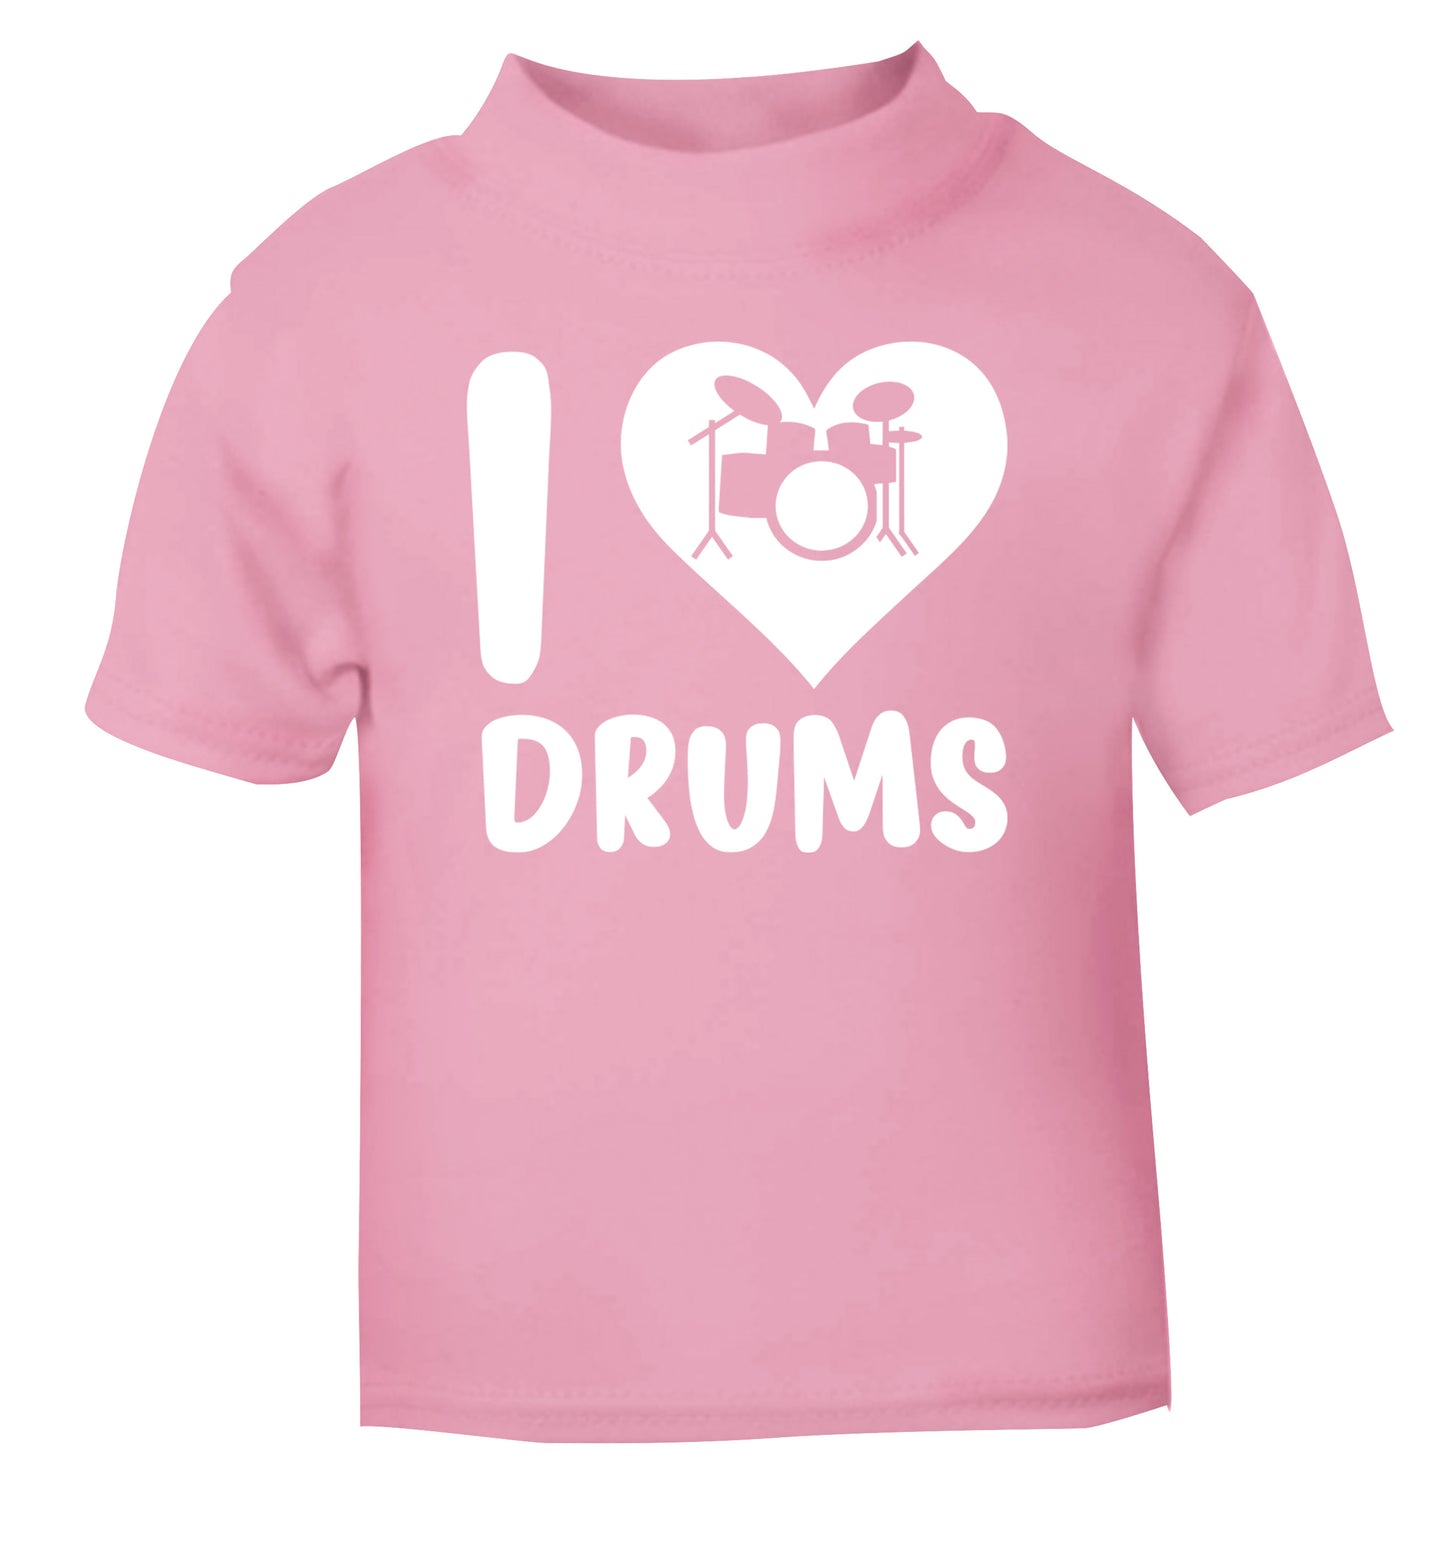 I love drums light pink Baby Toddler Tshirt 2 Years